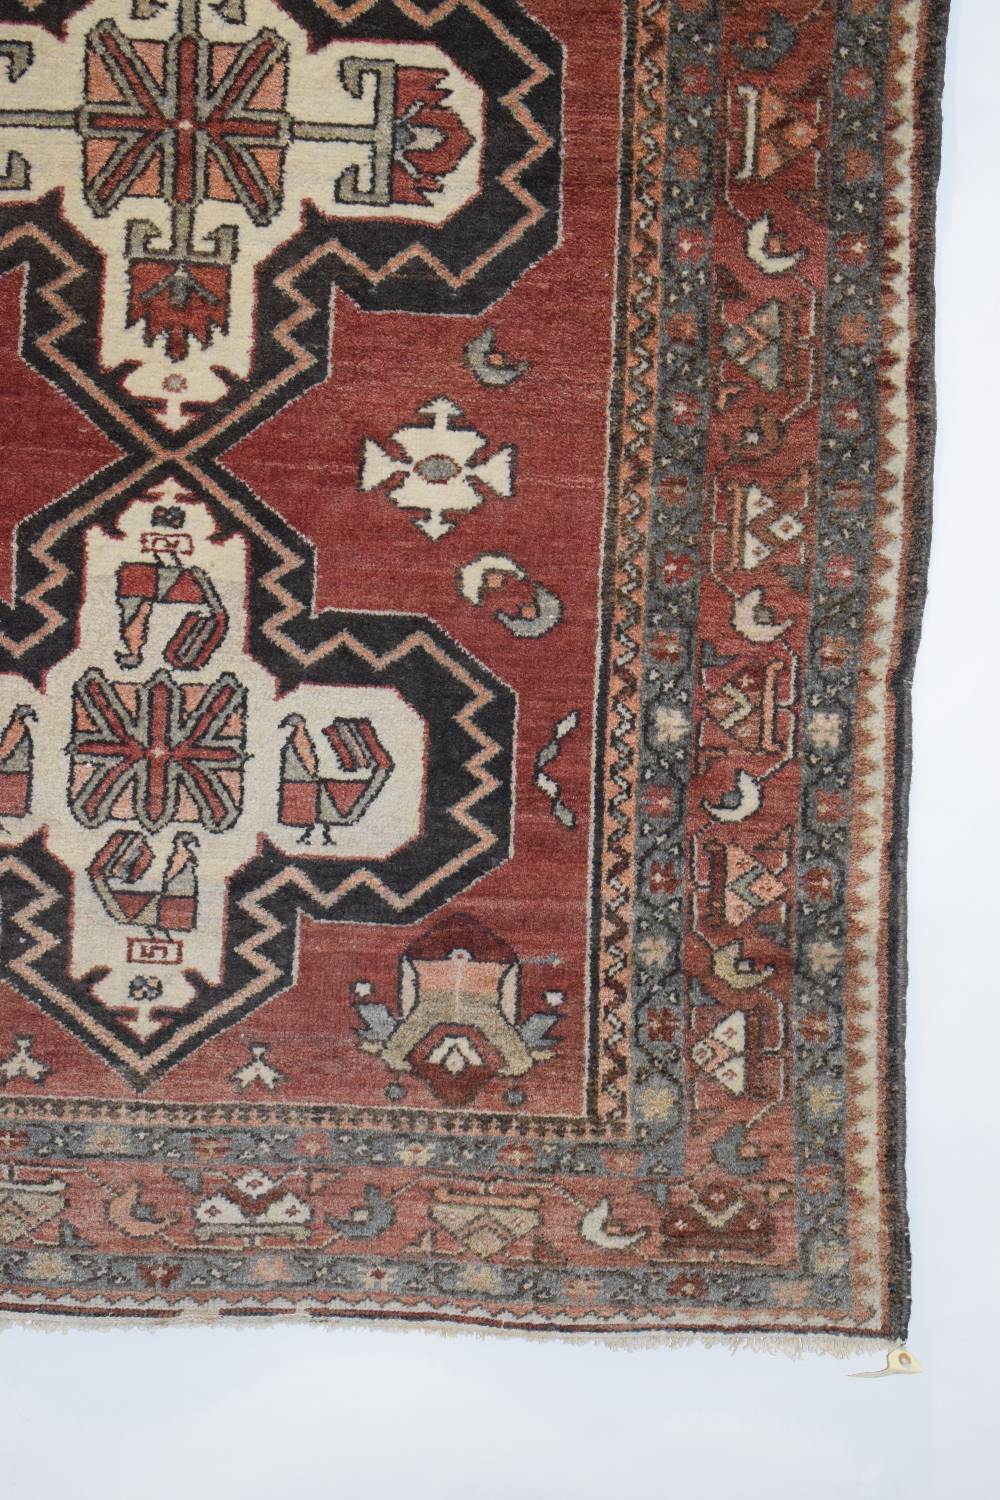 Hamadan rug, north west Persia, dated 1379 (AH) [1937 AD] 6ft. 7in. X 4ft. 2.01m. X 1.22m. Overall - Image 2 of 10